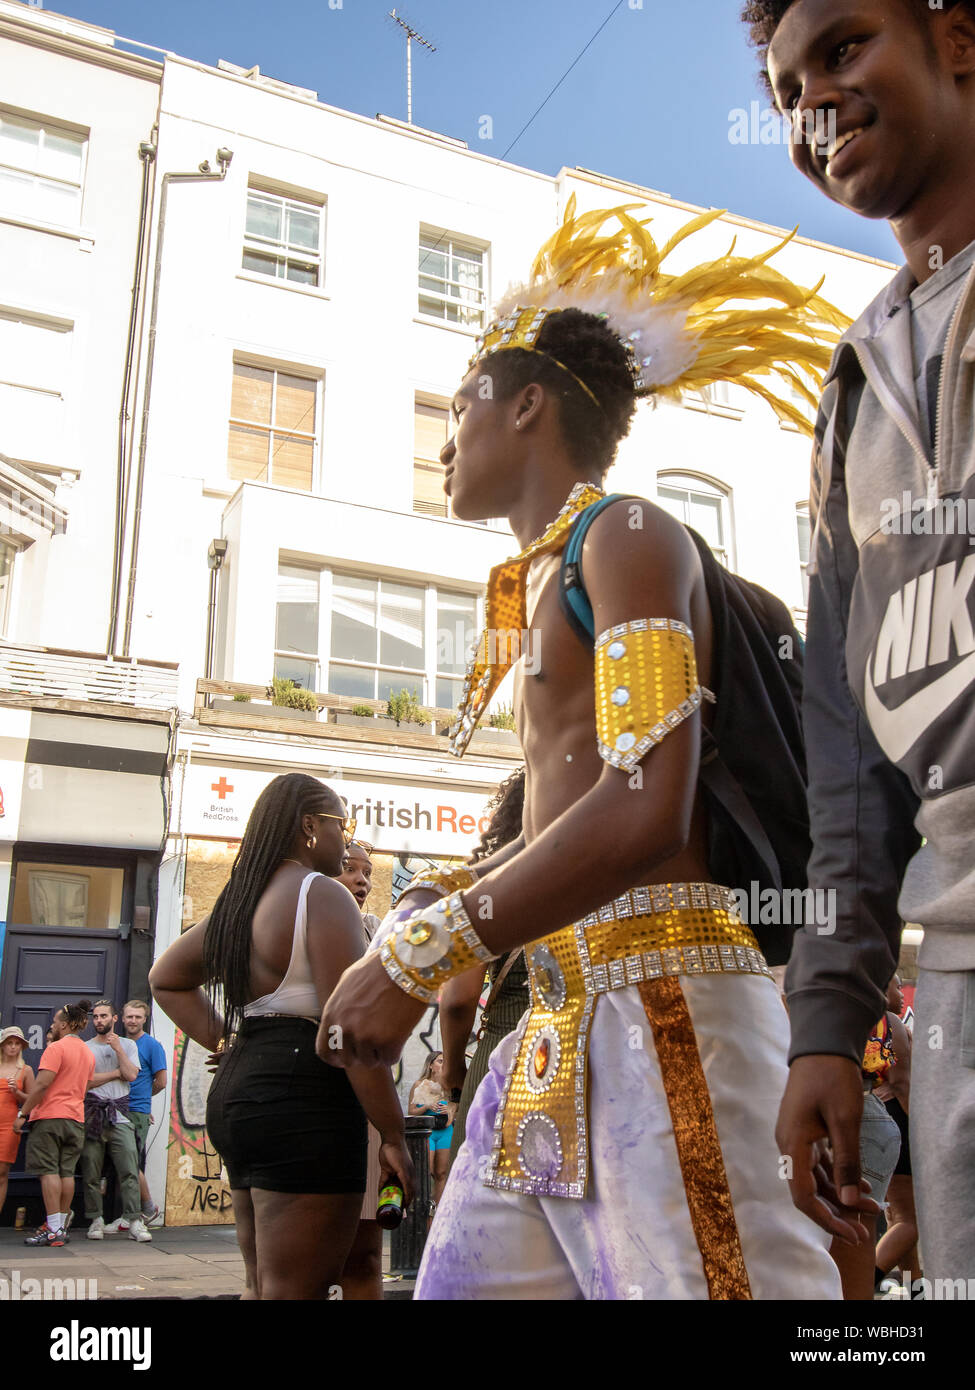 A male masquerader. Notting Hill Carnival 2019 continued on Bank Holiday Monday, with over a million revellers hitting the streets of West London, amongst floats, masqueraders, steel bands, and sound systems. Stock Photo